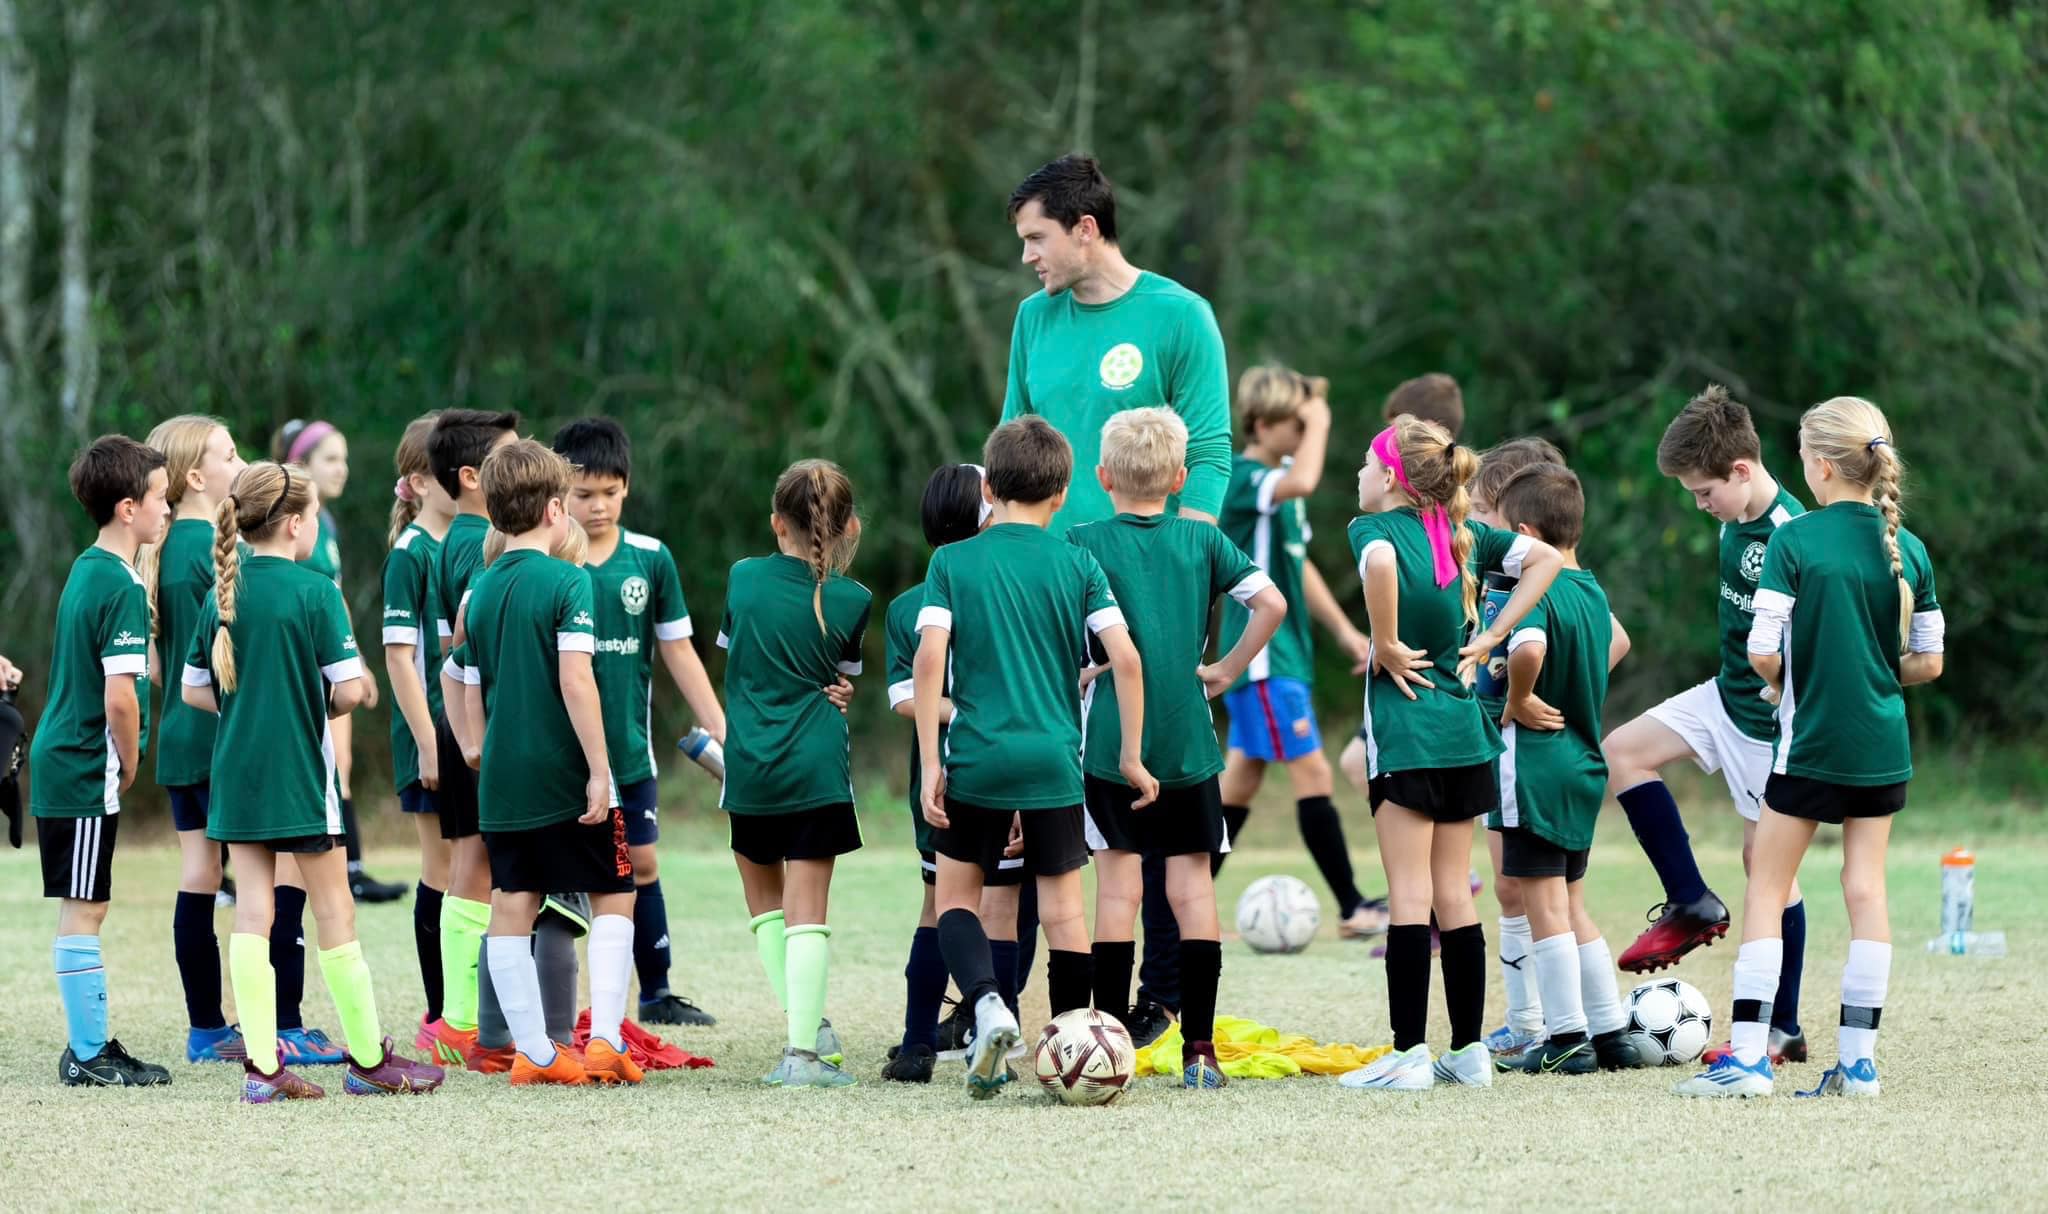 Good Lad Soccer Cultivating Youth Soccer in Jacksonville one player at a time featured image